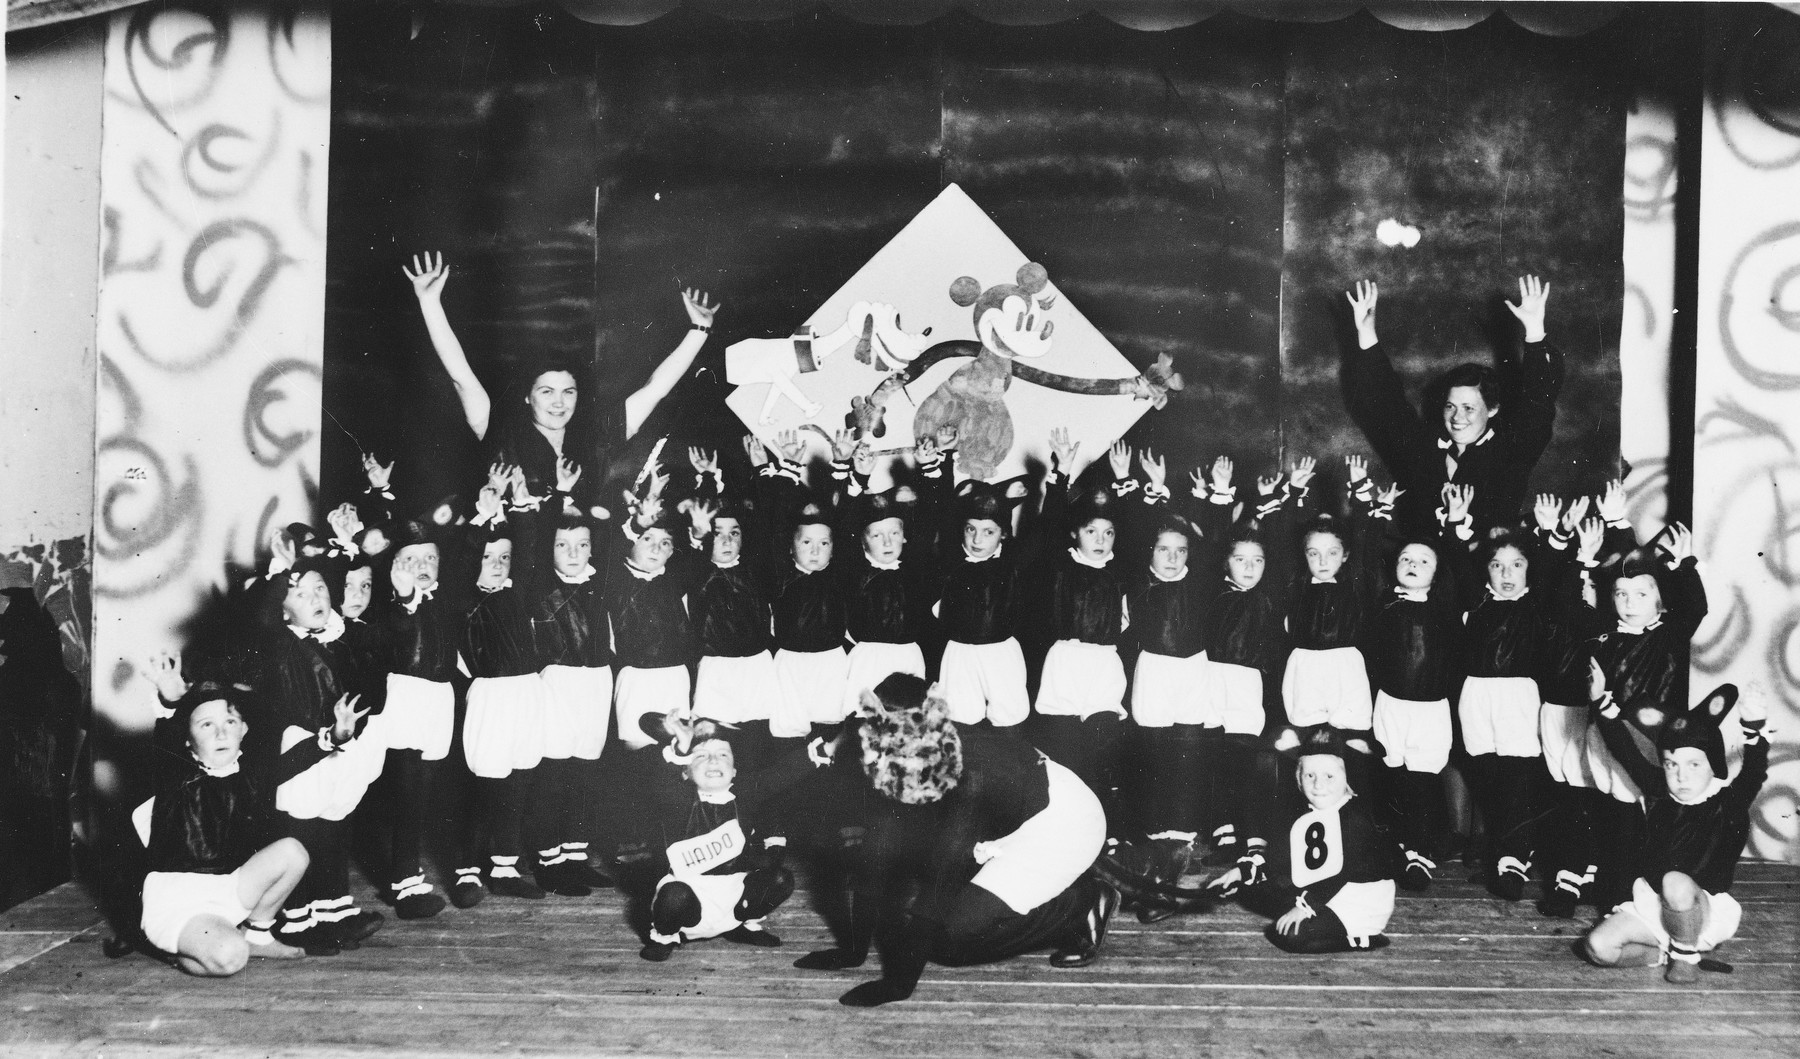 Children dressed as mice put on a school performance at the Novaky labor camp.

Among those pictured, in the second row, sixth from the right, is Mira Frenkel (now Frenkel).